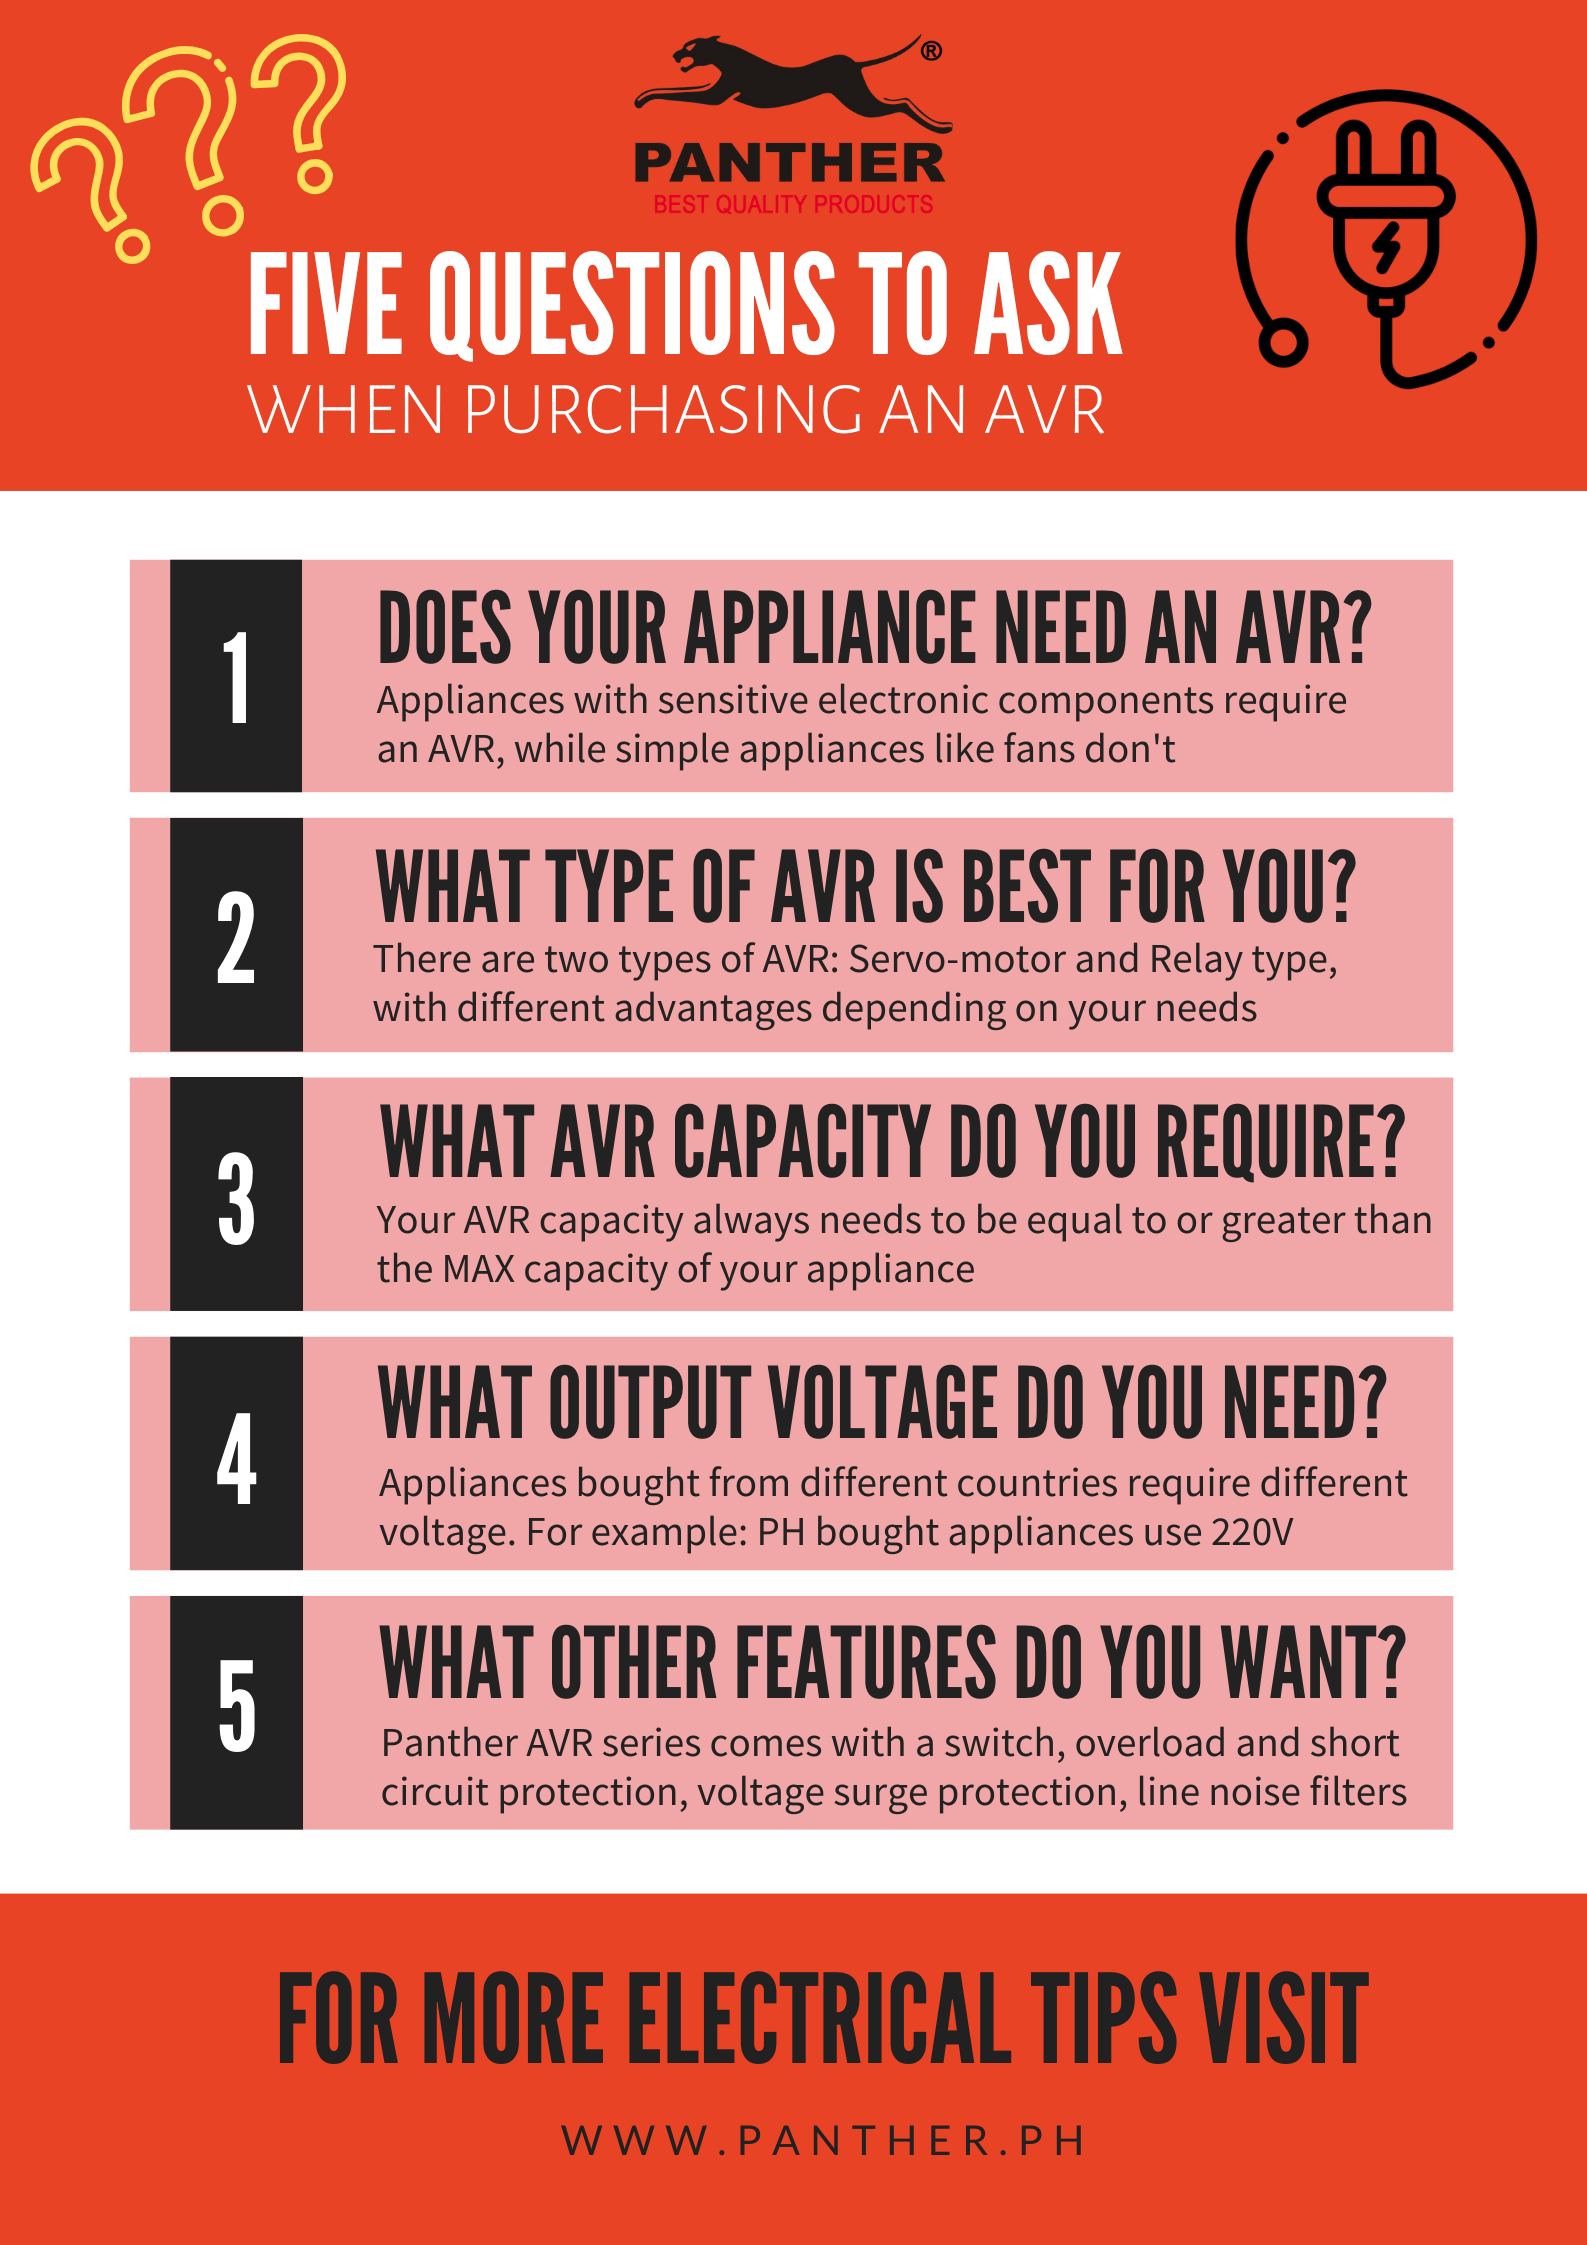 Infographic teaching consumers the five questions to ask when purchasing an AVR